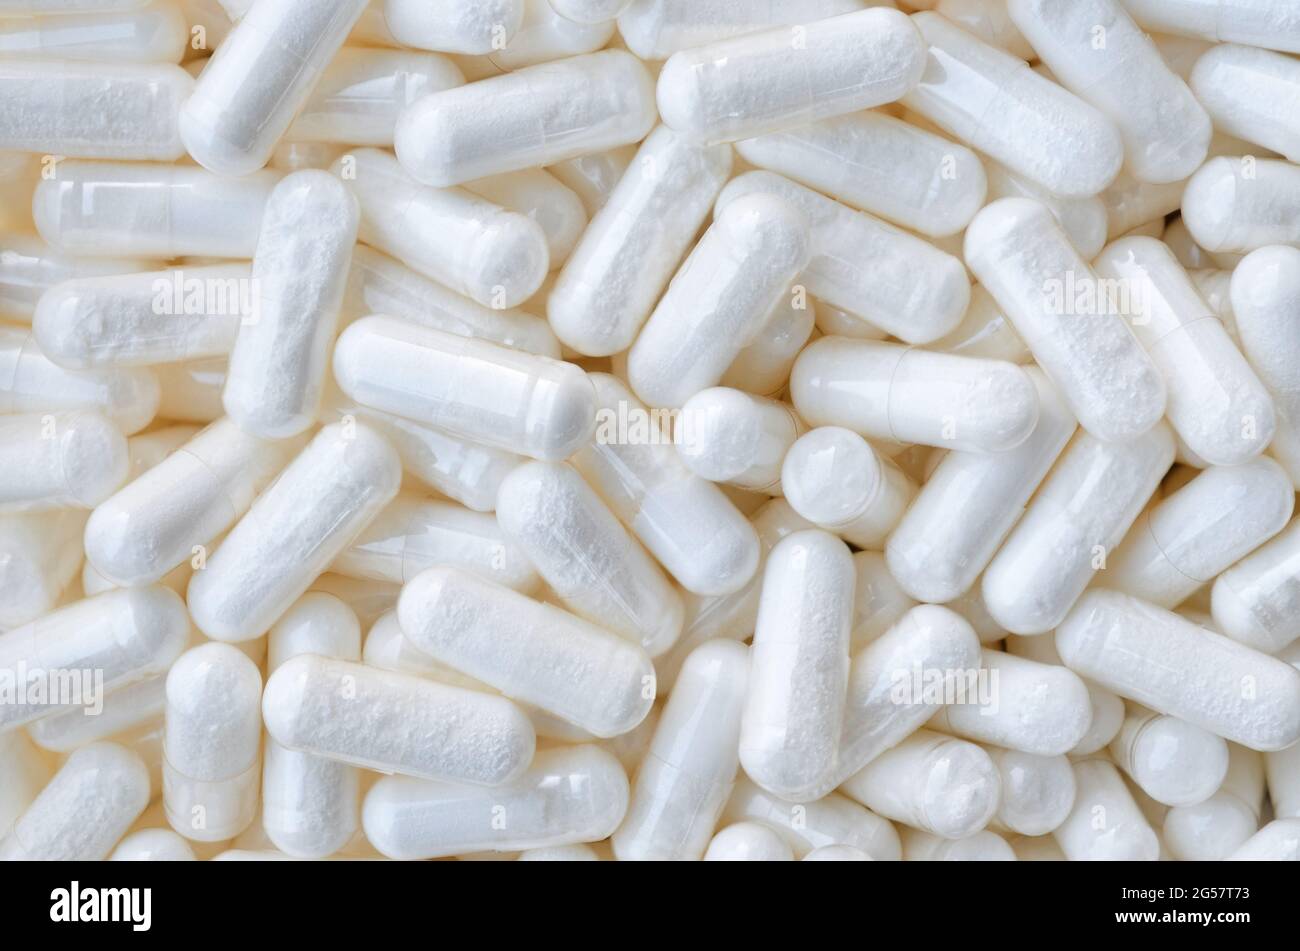 Lots of white pills-capsules as a background, top view. Healthcare concept. Stock Photo